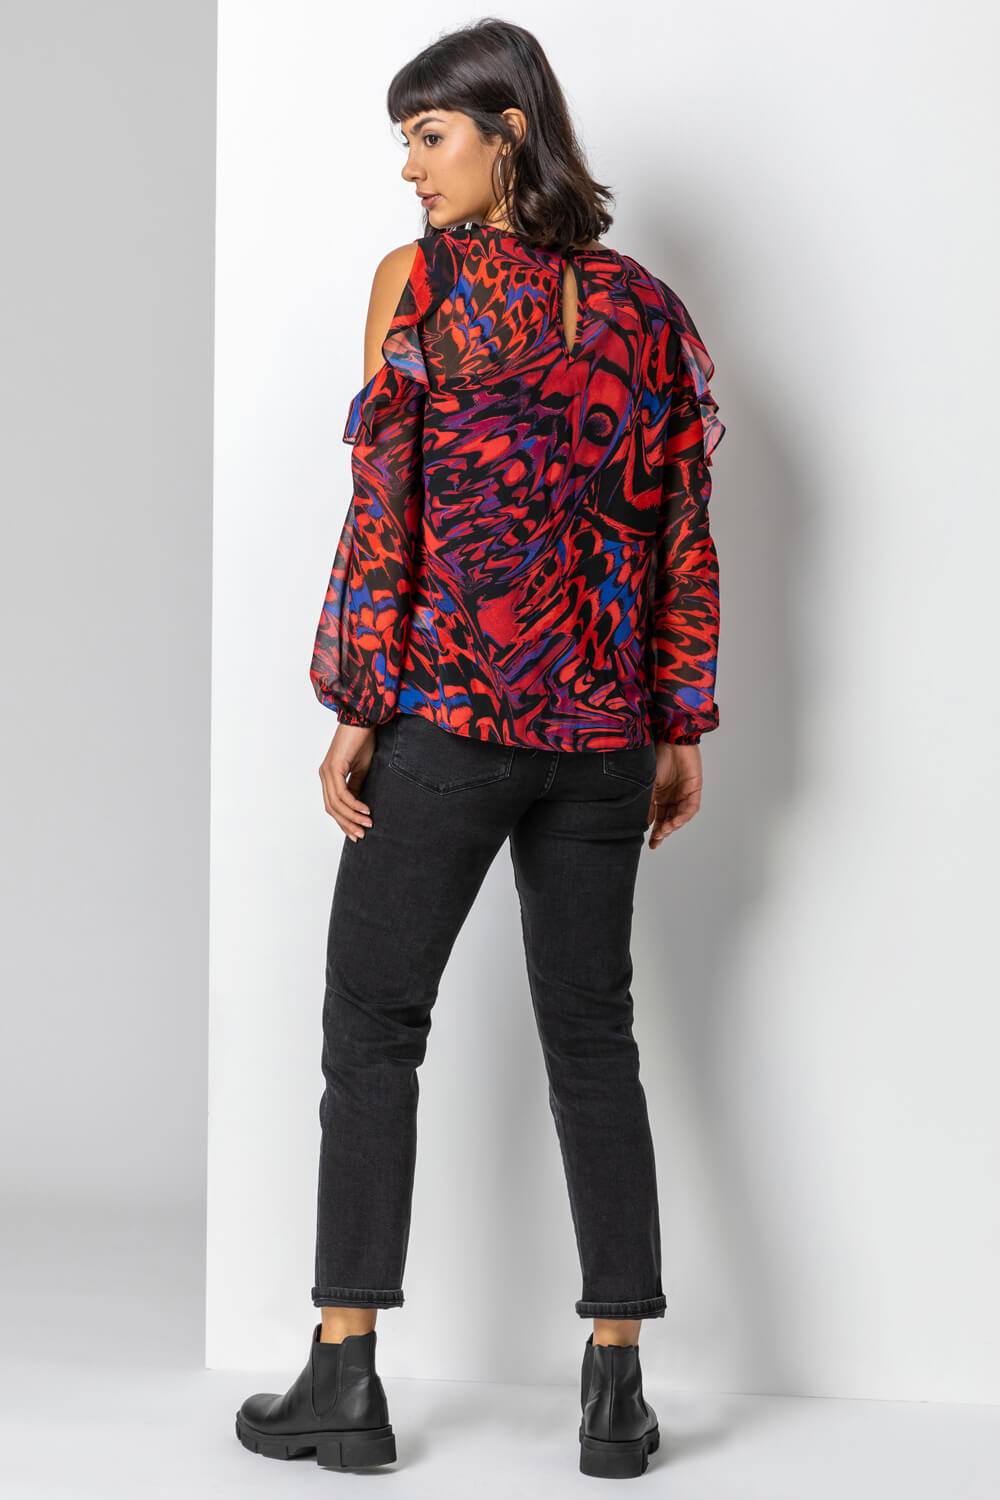 Red Abstract Butterfly Print Blouse, Image 2 of 4